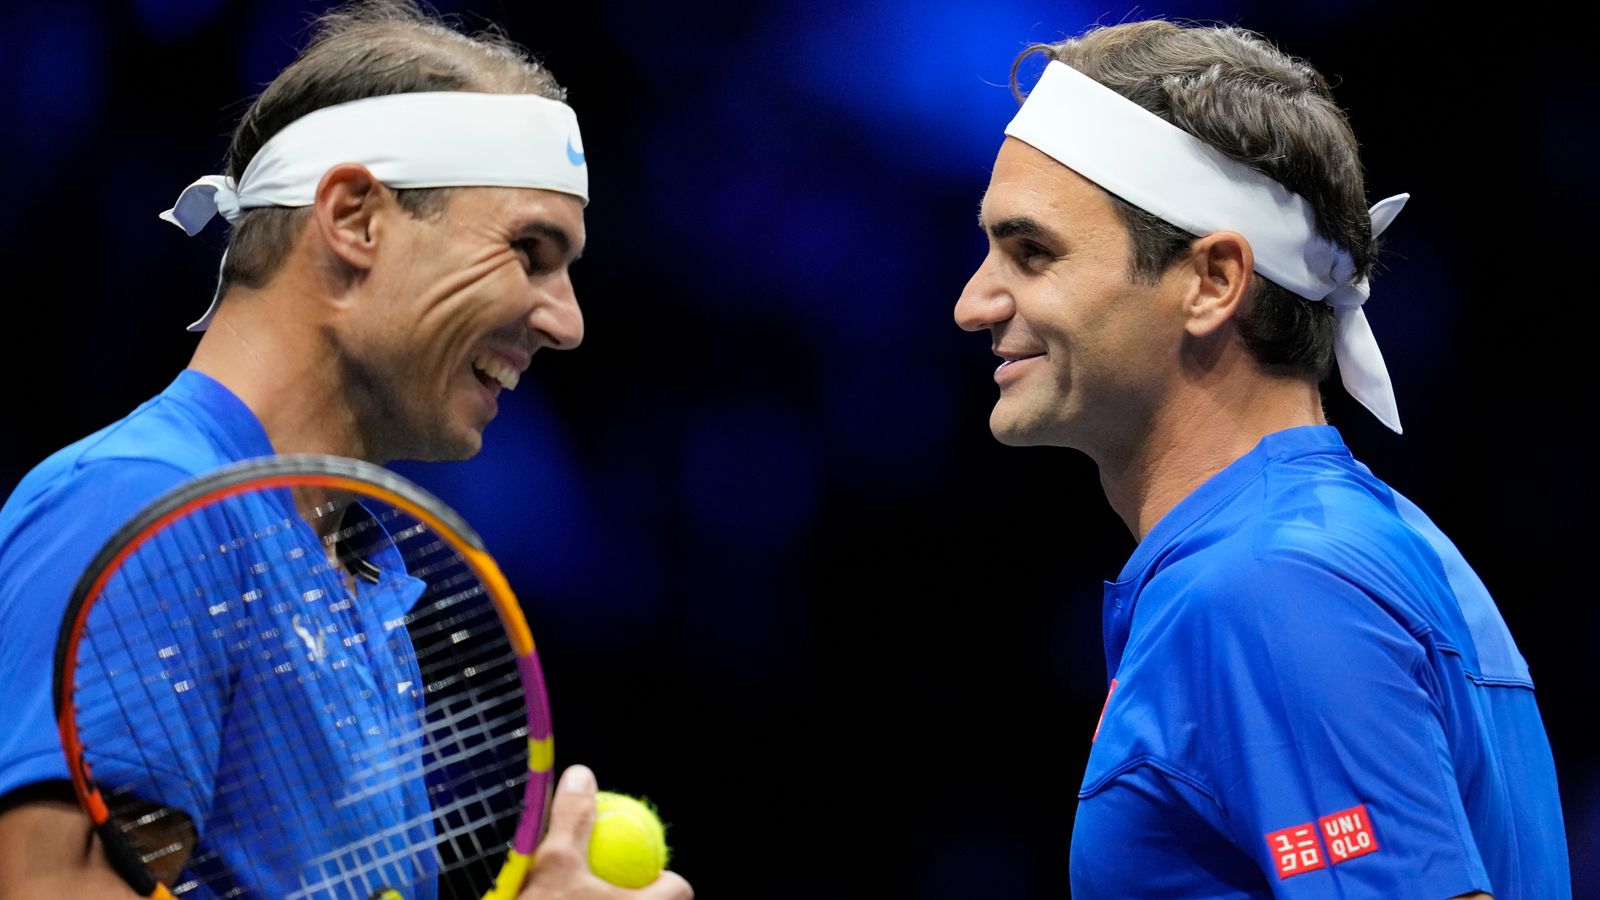 Rafael Nadal says a part of his life left with Roger Federer when his tennis rival retired